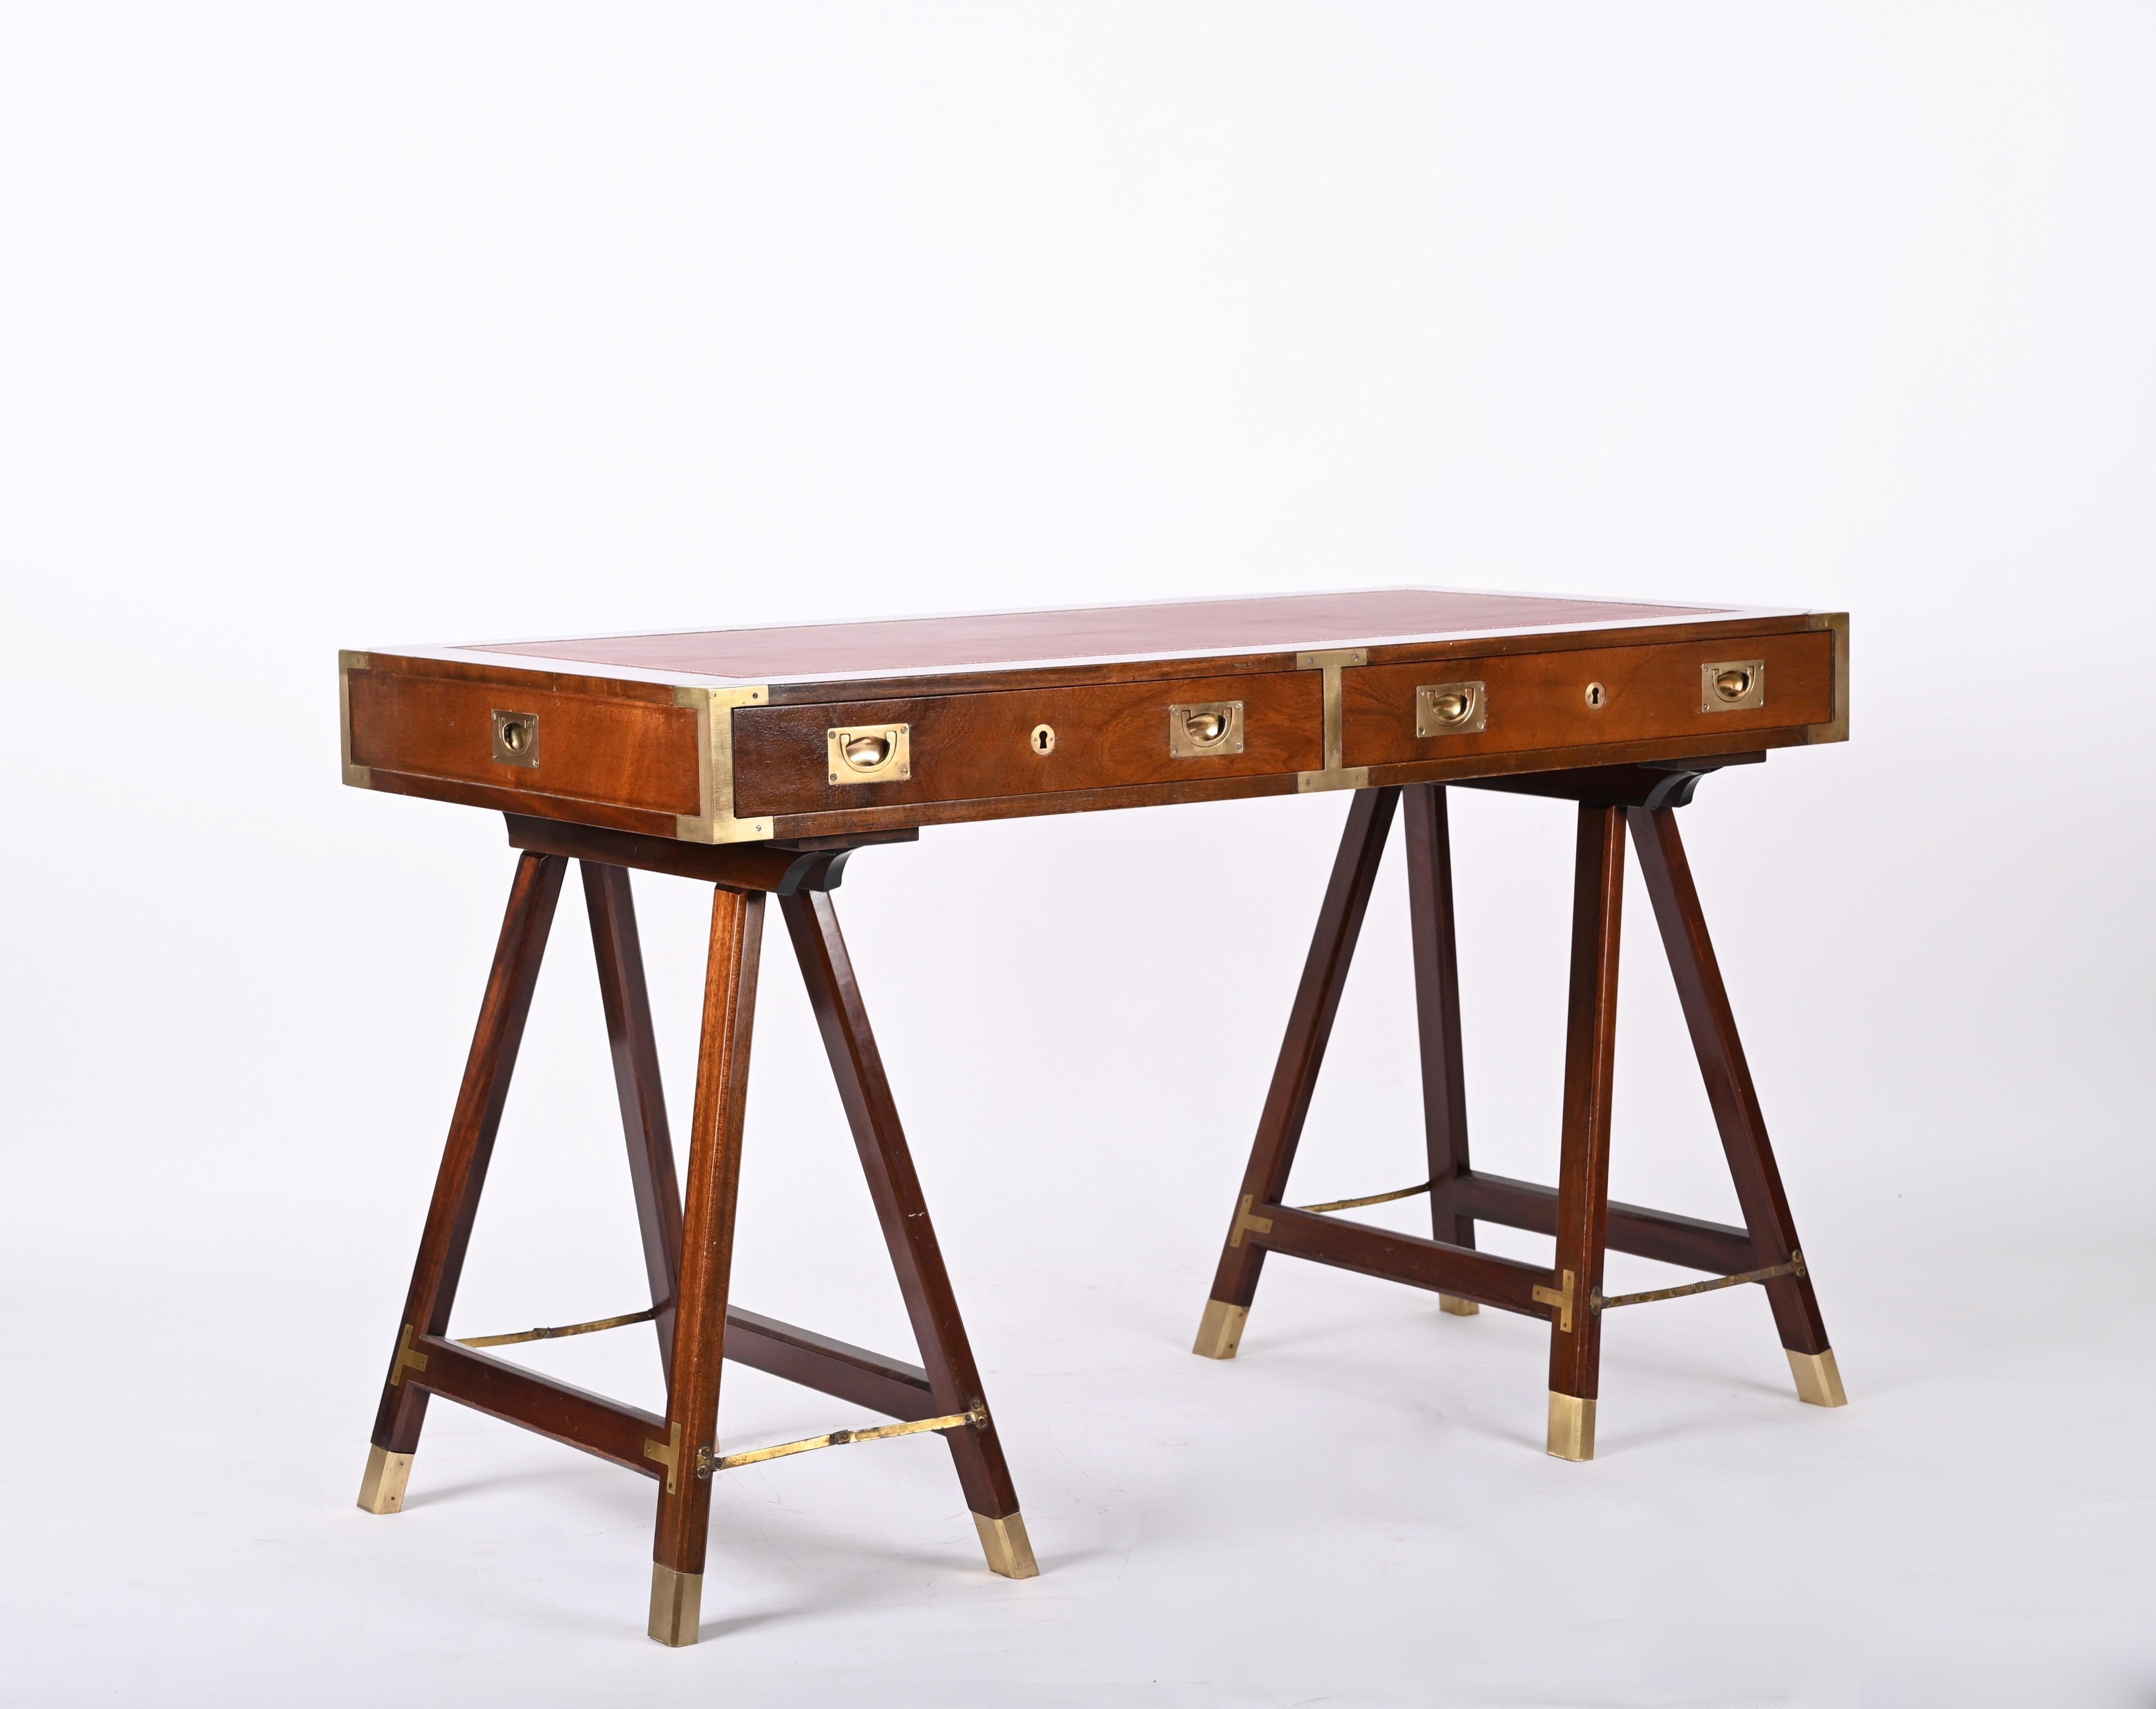 20th Century Midcentury English Military Style Wood and Brass Desk with Leather Top, 1960s